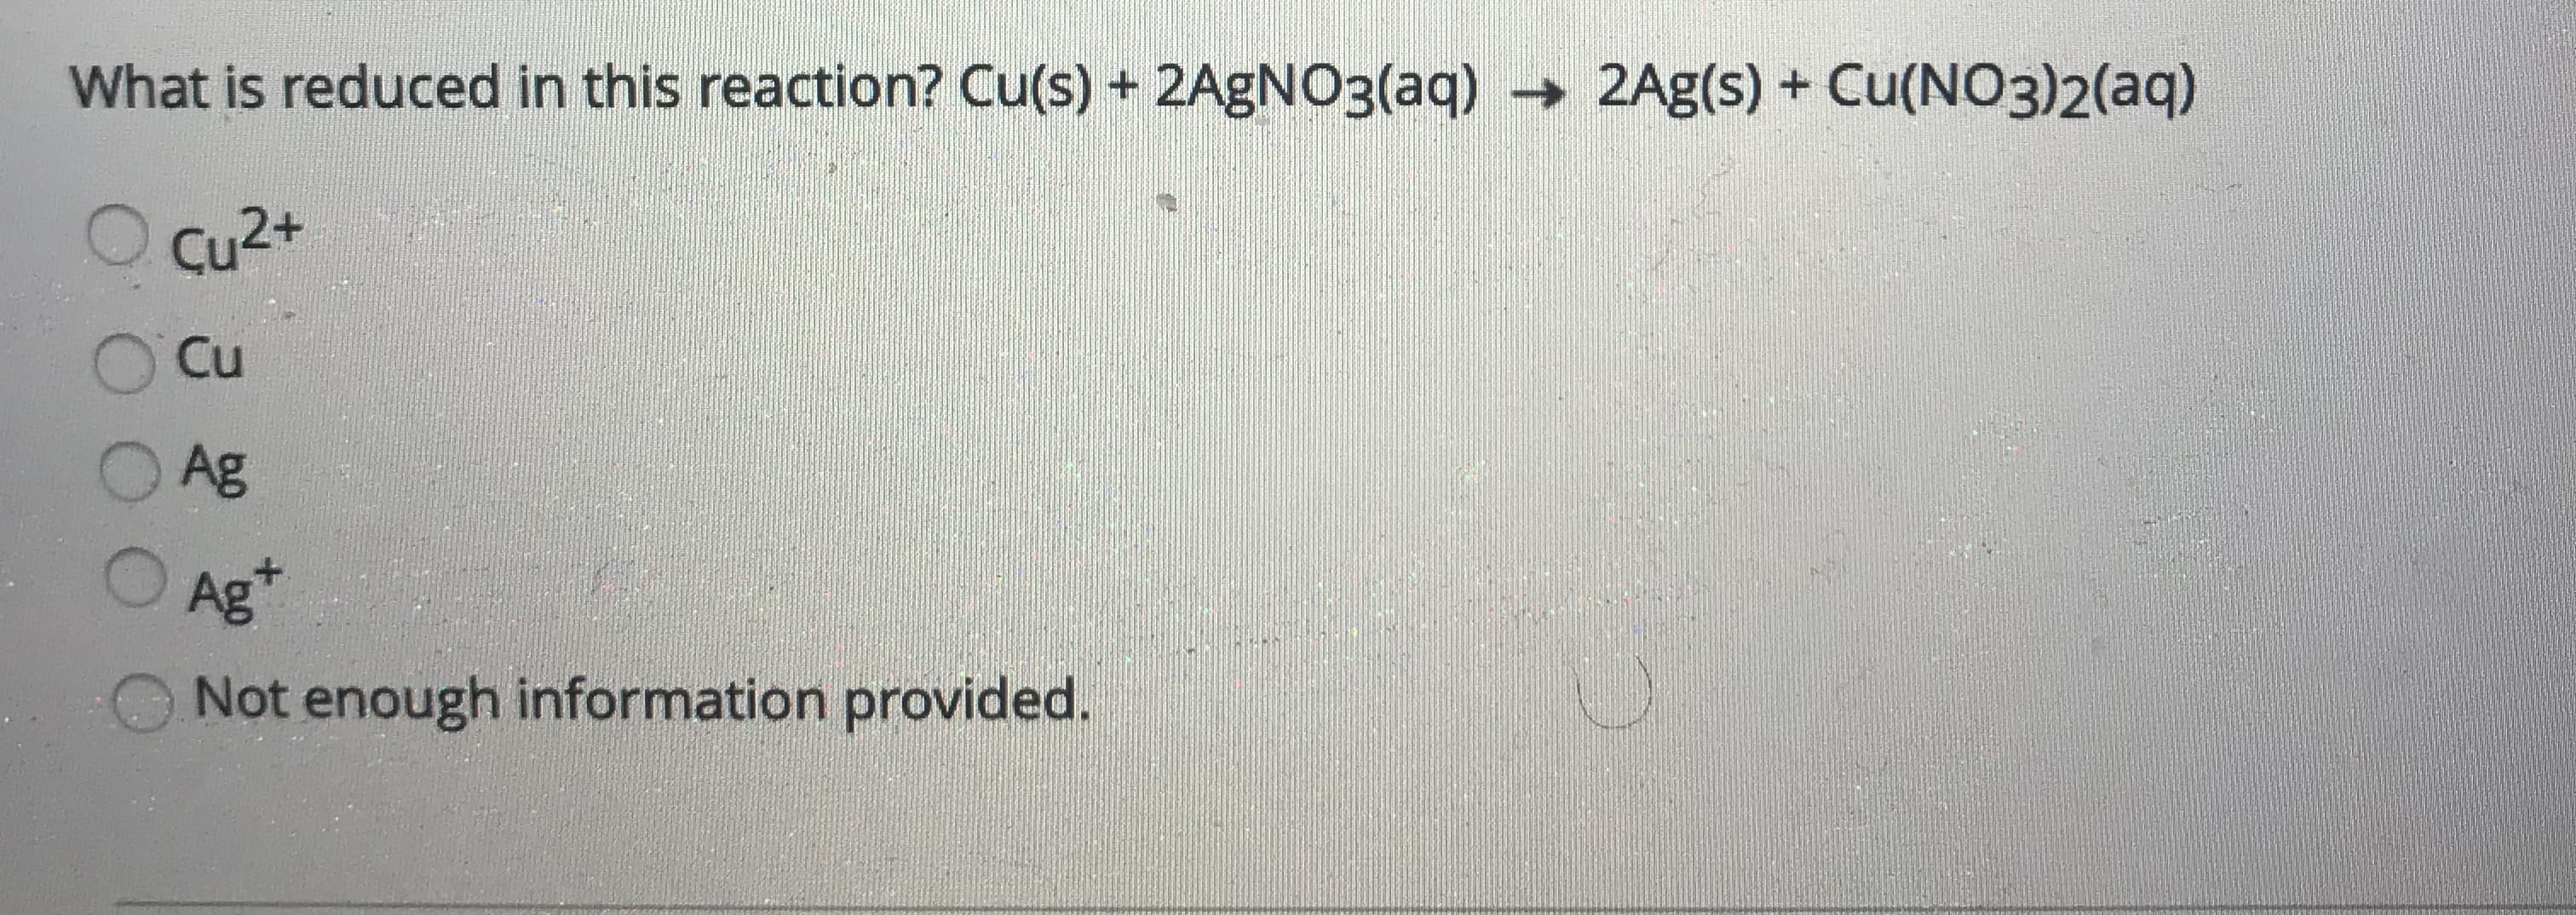 What is reduced in this reaction? Cu(s) + 2A9NO3(aq) → 2Ag(s) + Cu(NO3)2(aq)
